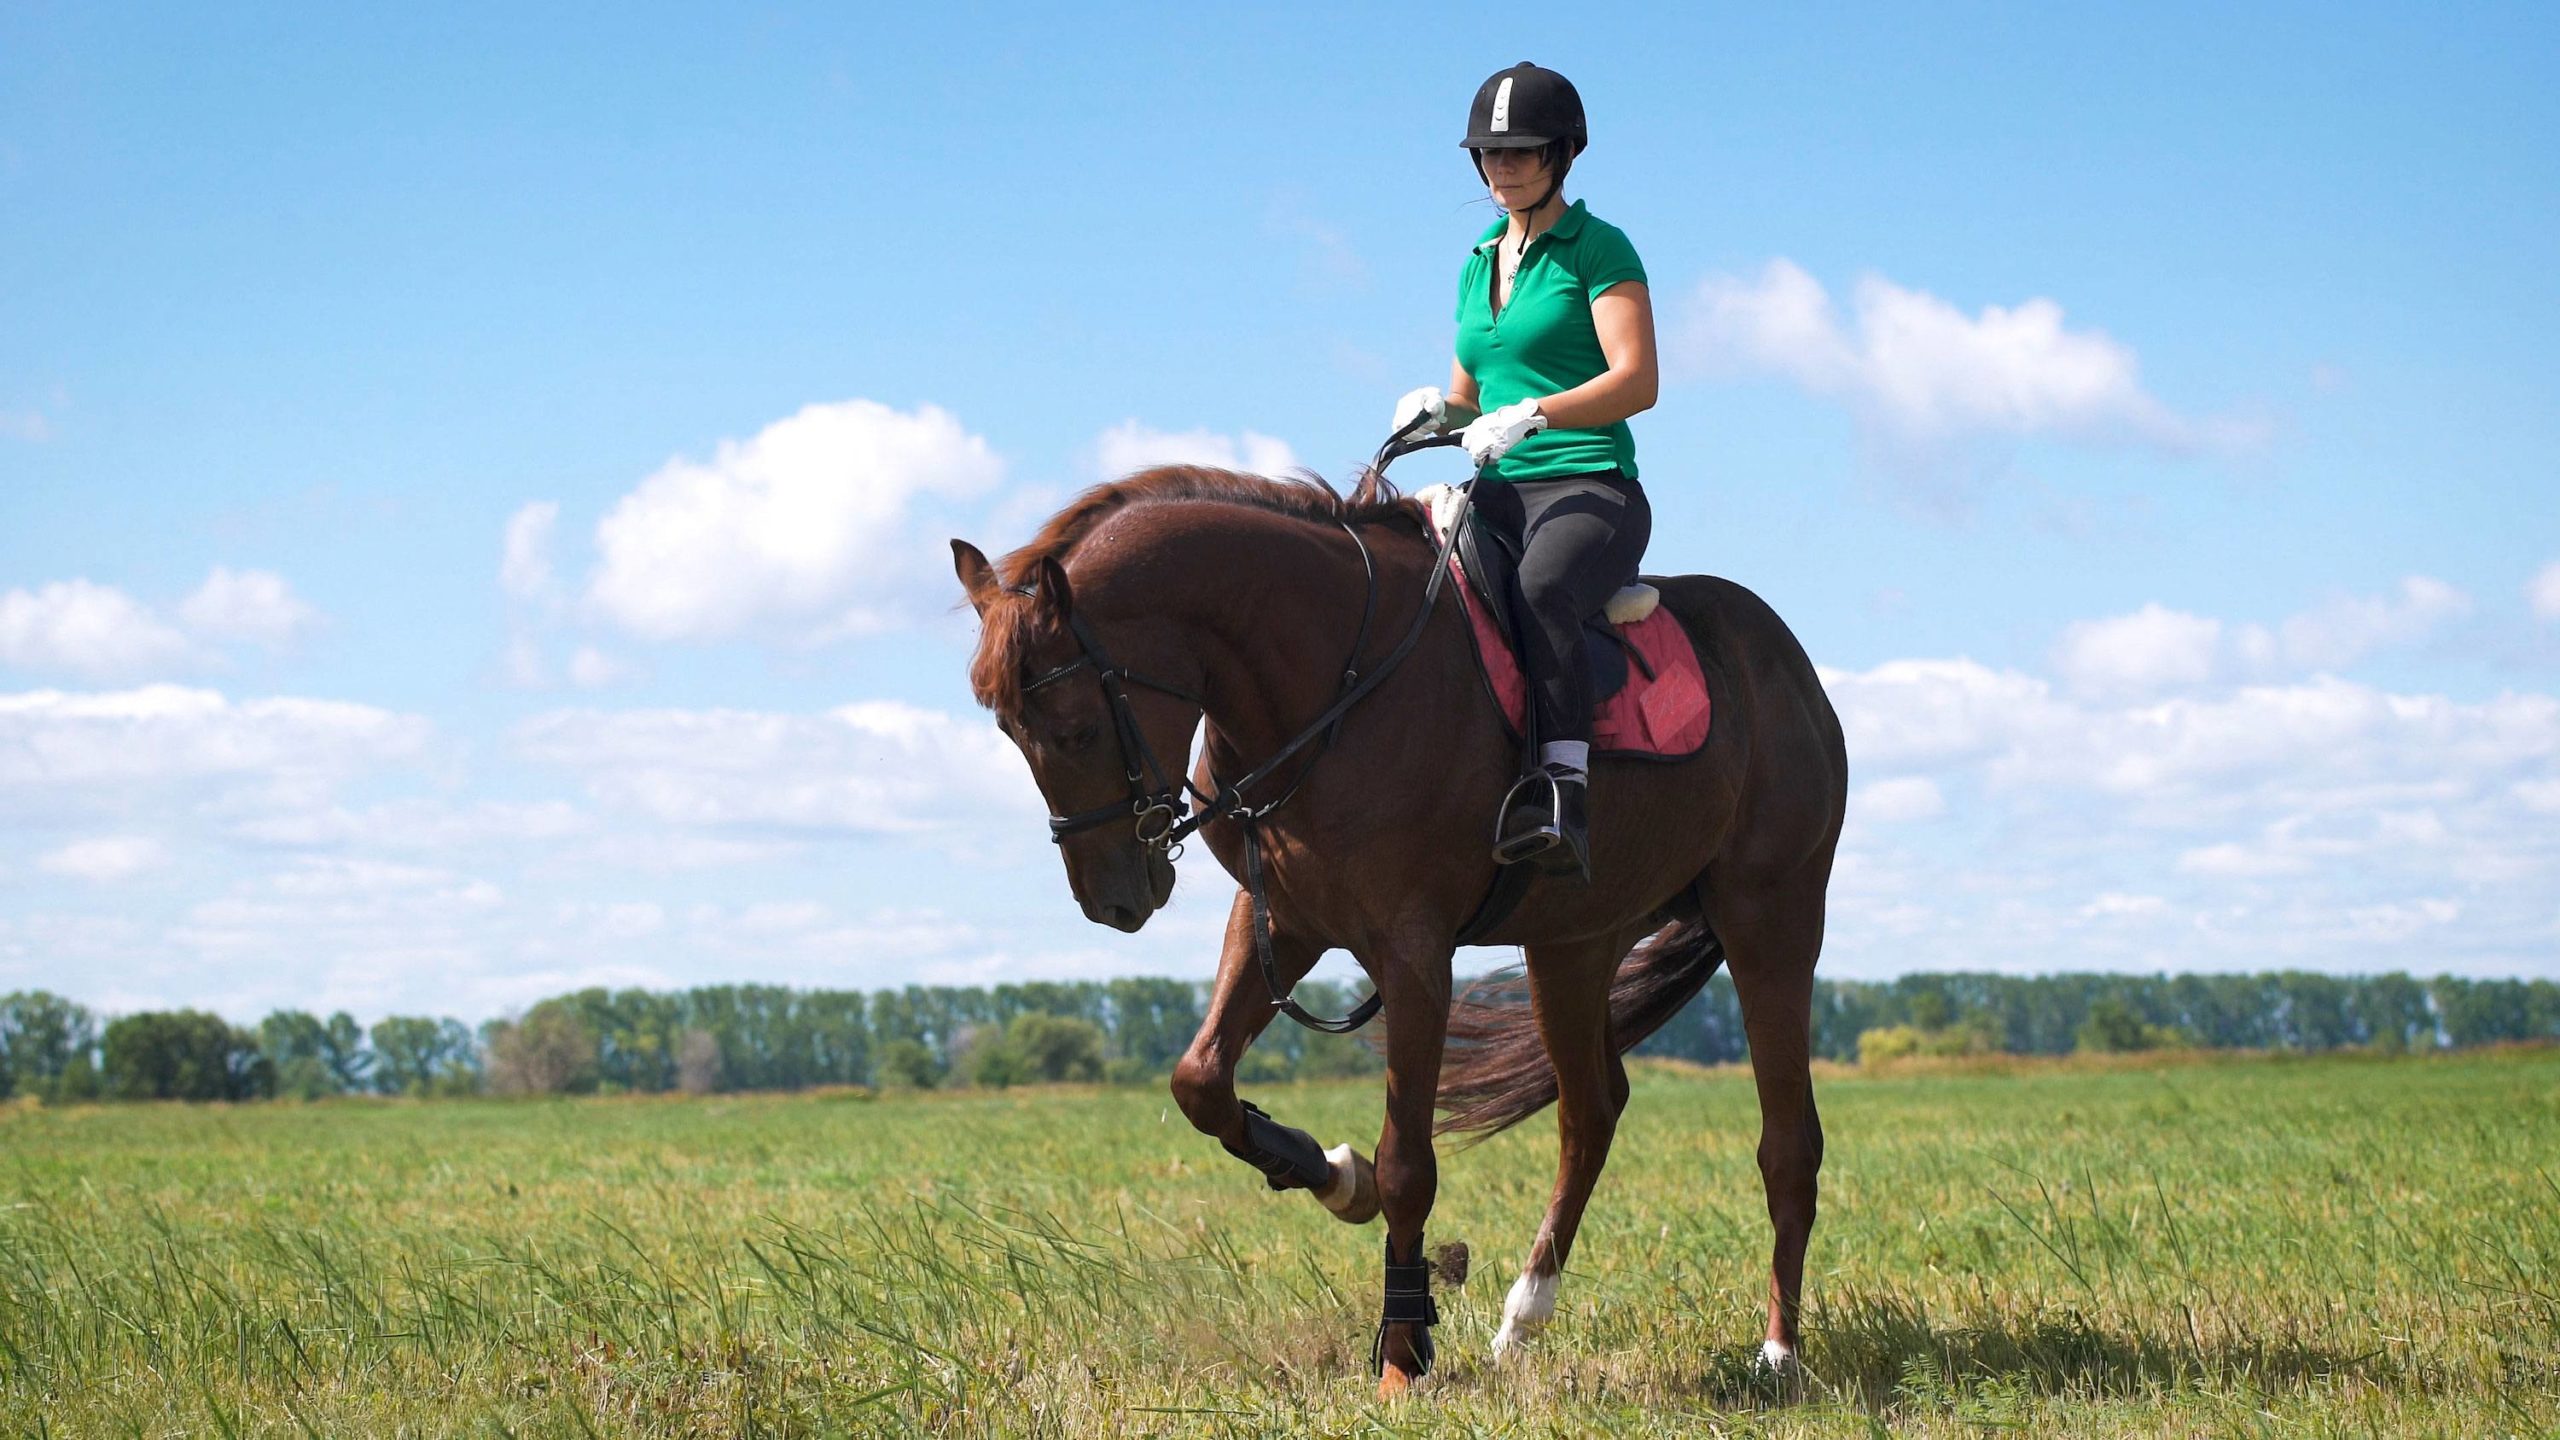 Woman on Horse in Field - Equitation Science